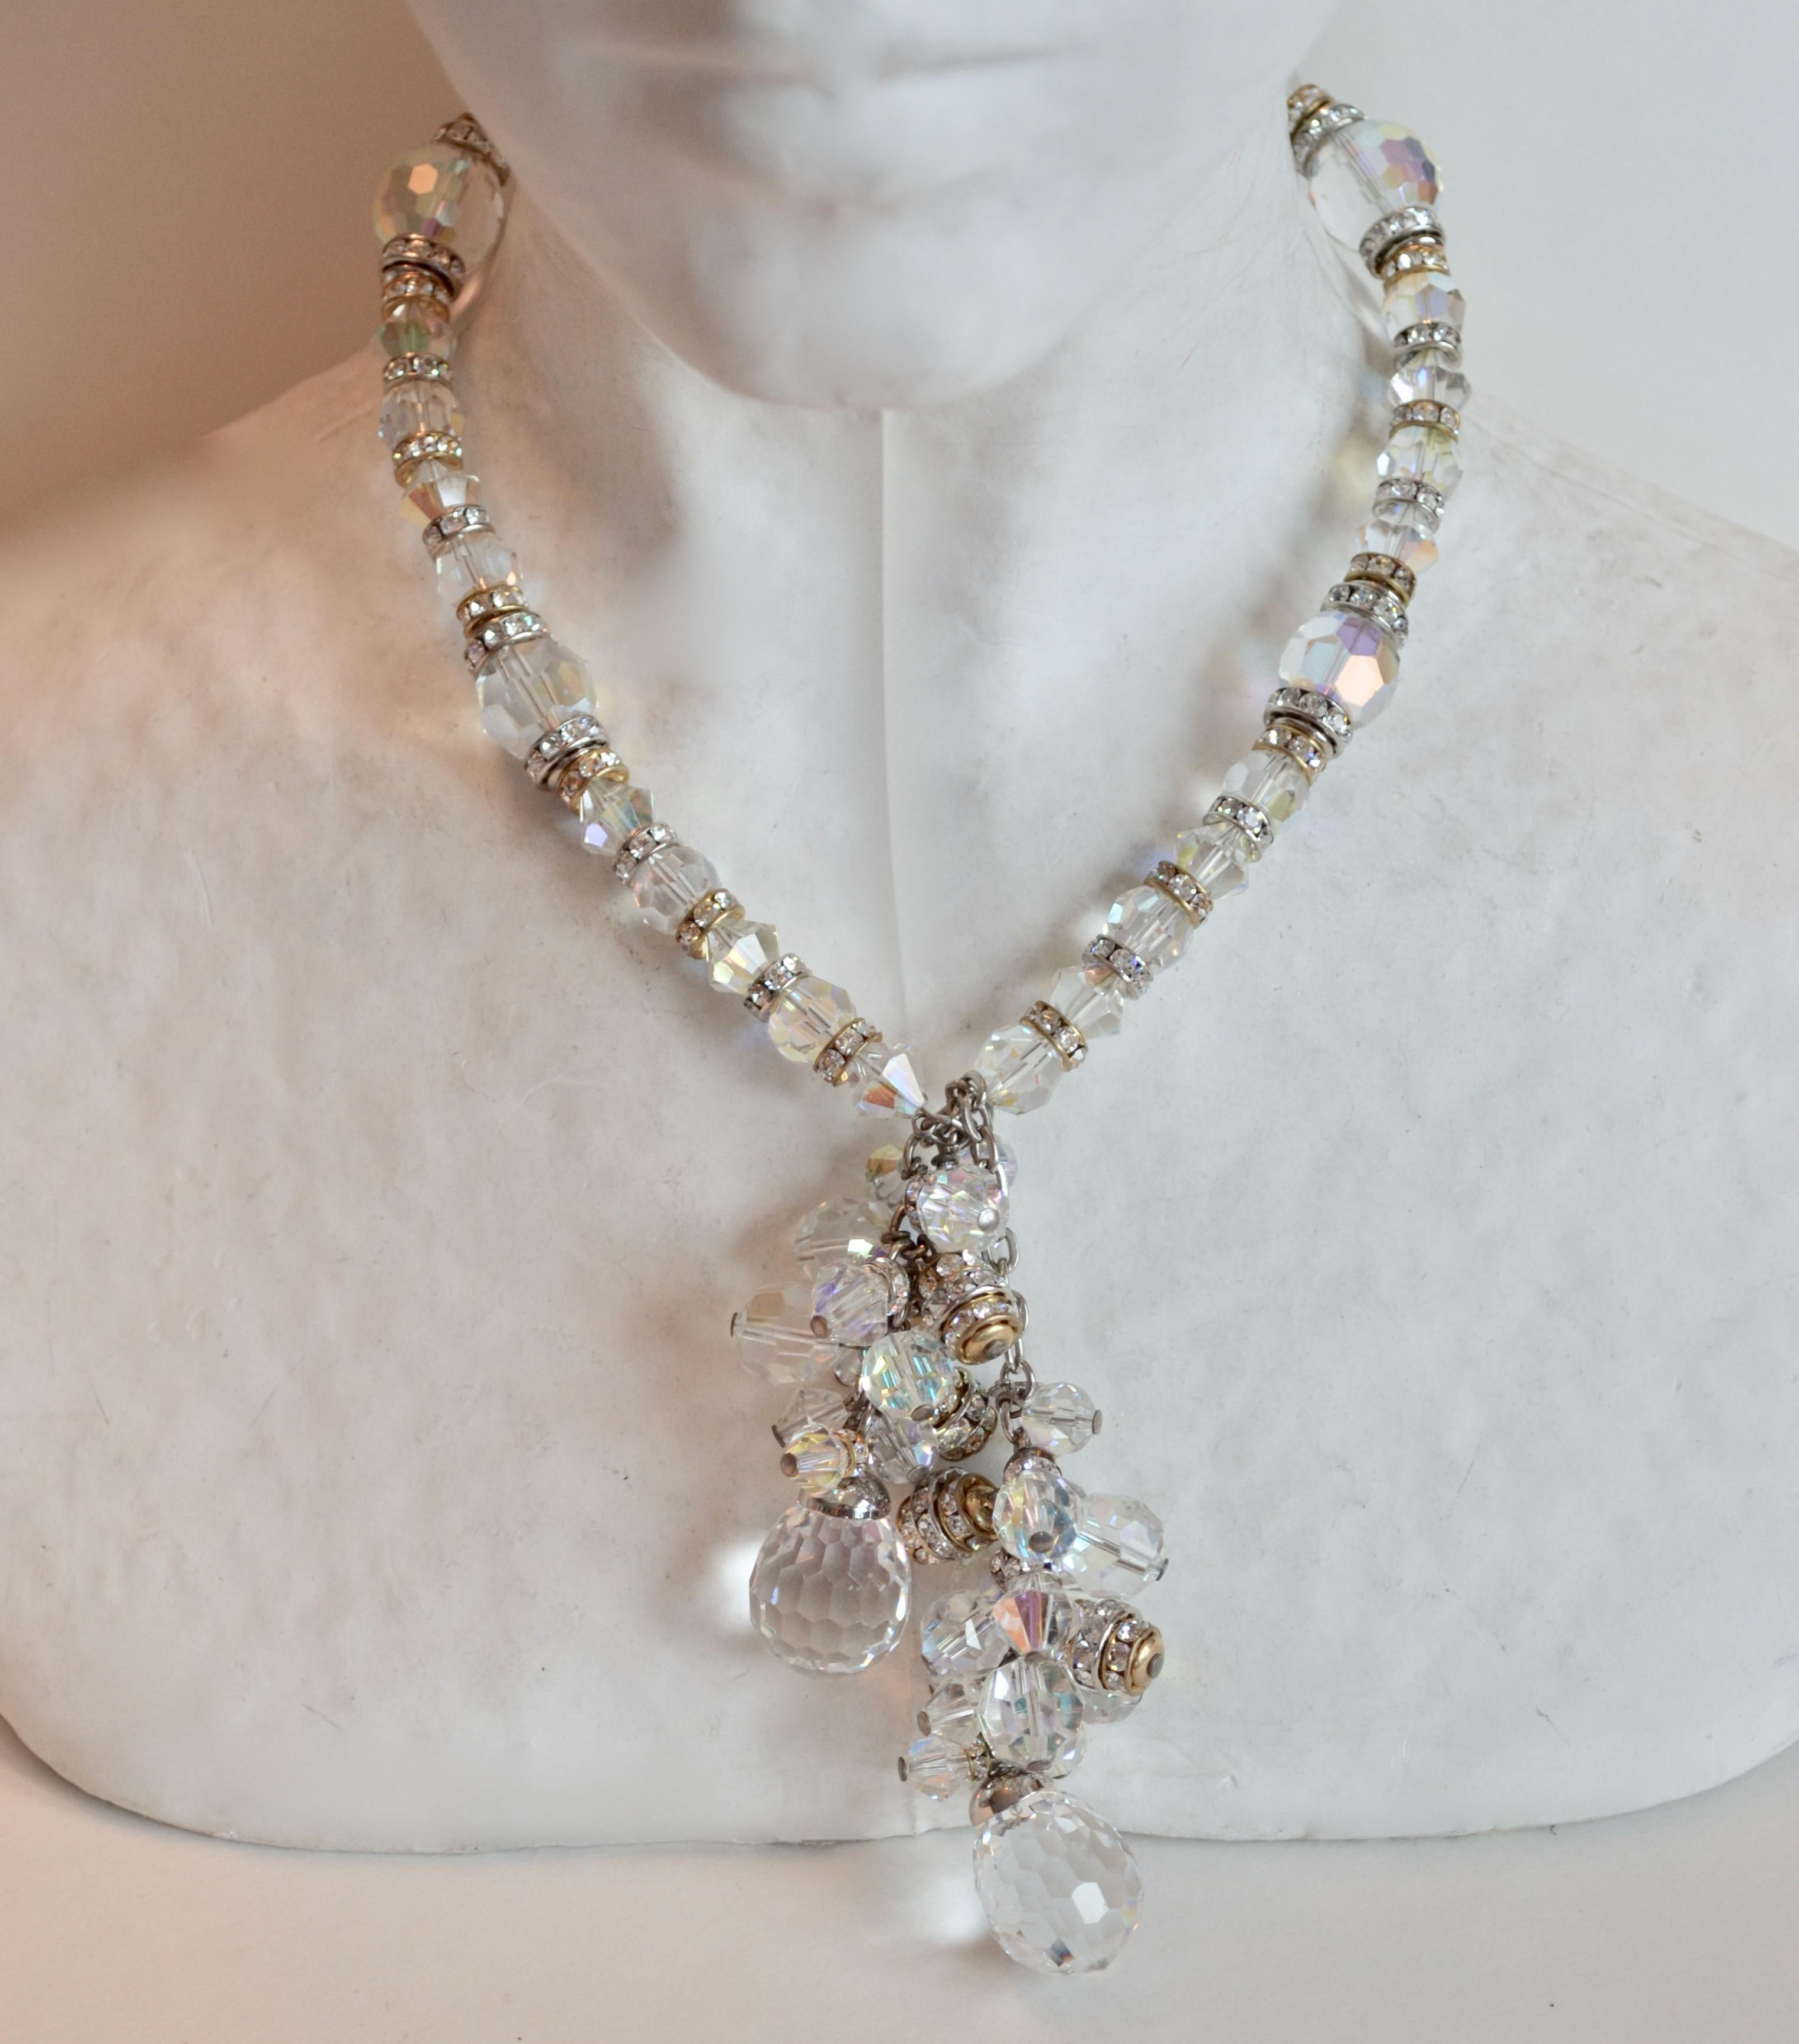 Alternating iridescent glass beads and clear Swarovski crystals are strung on memory wire in this lariat necklace from Francoise Montague. The tassel lariat can be tied and twisted a number of ways creating a decorative front closure. 